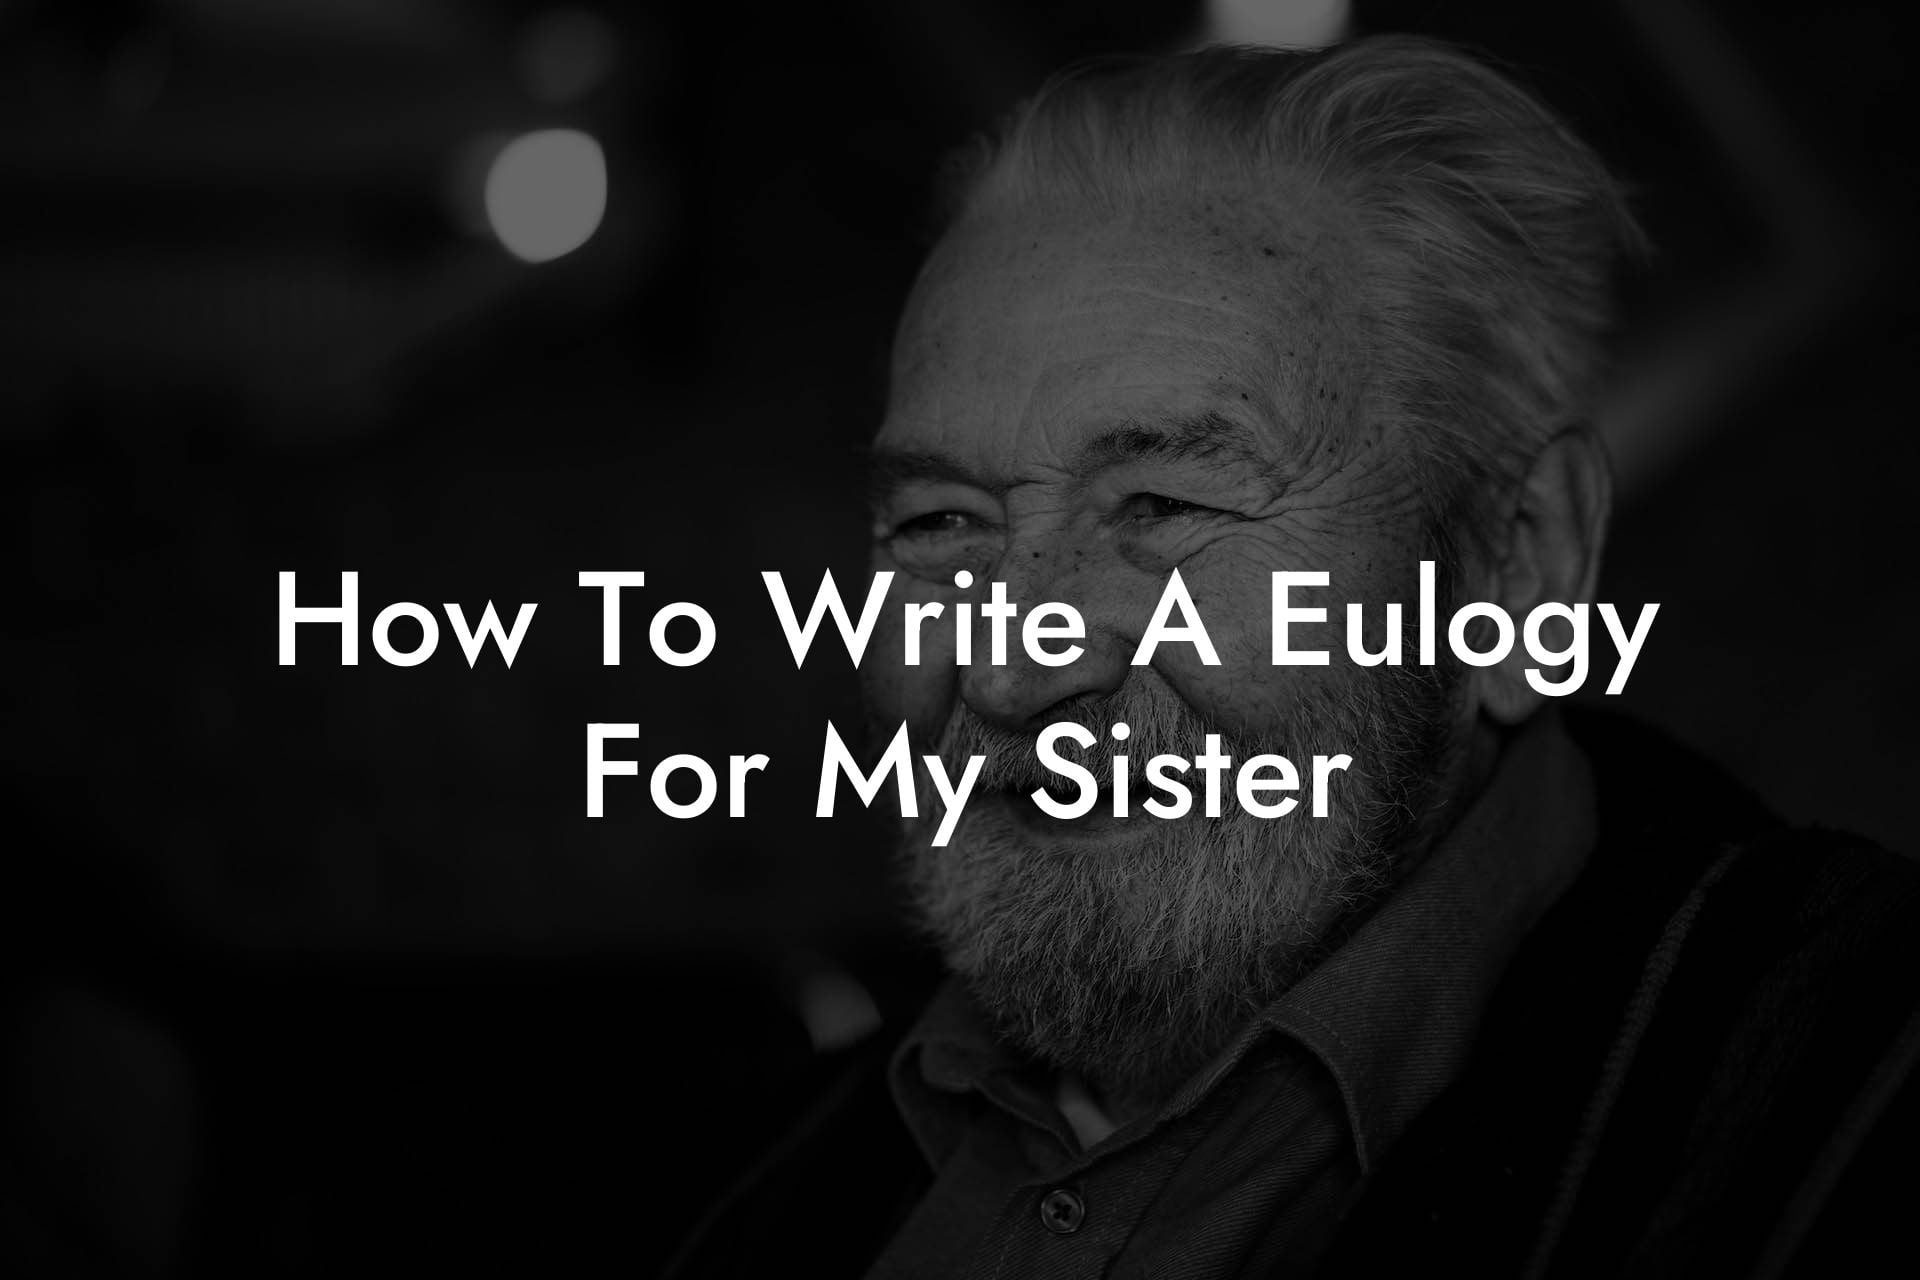 How To Write A Eulogy For My Sister